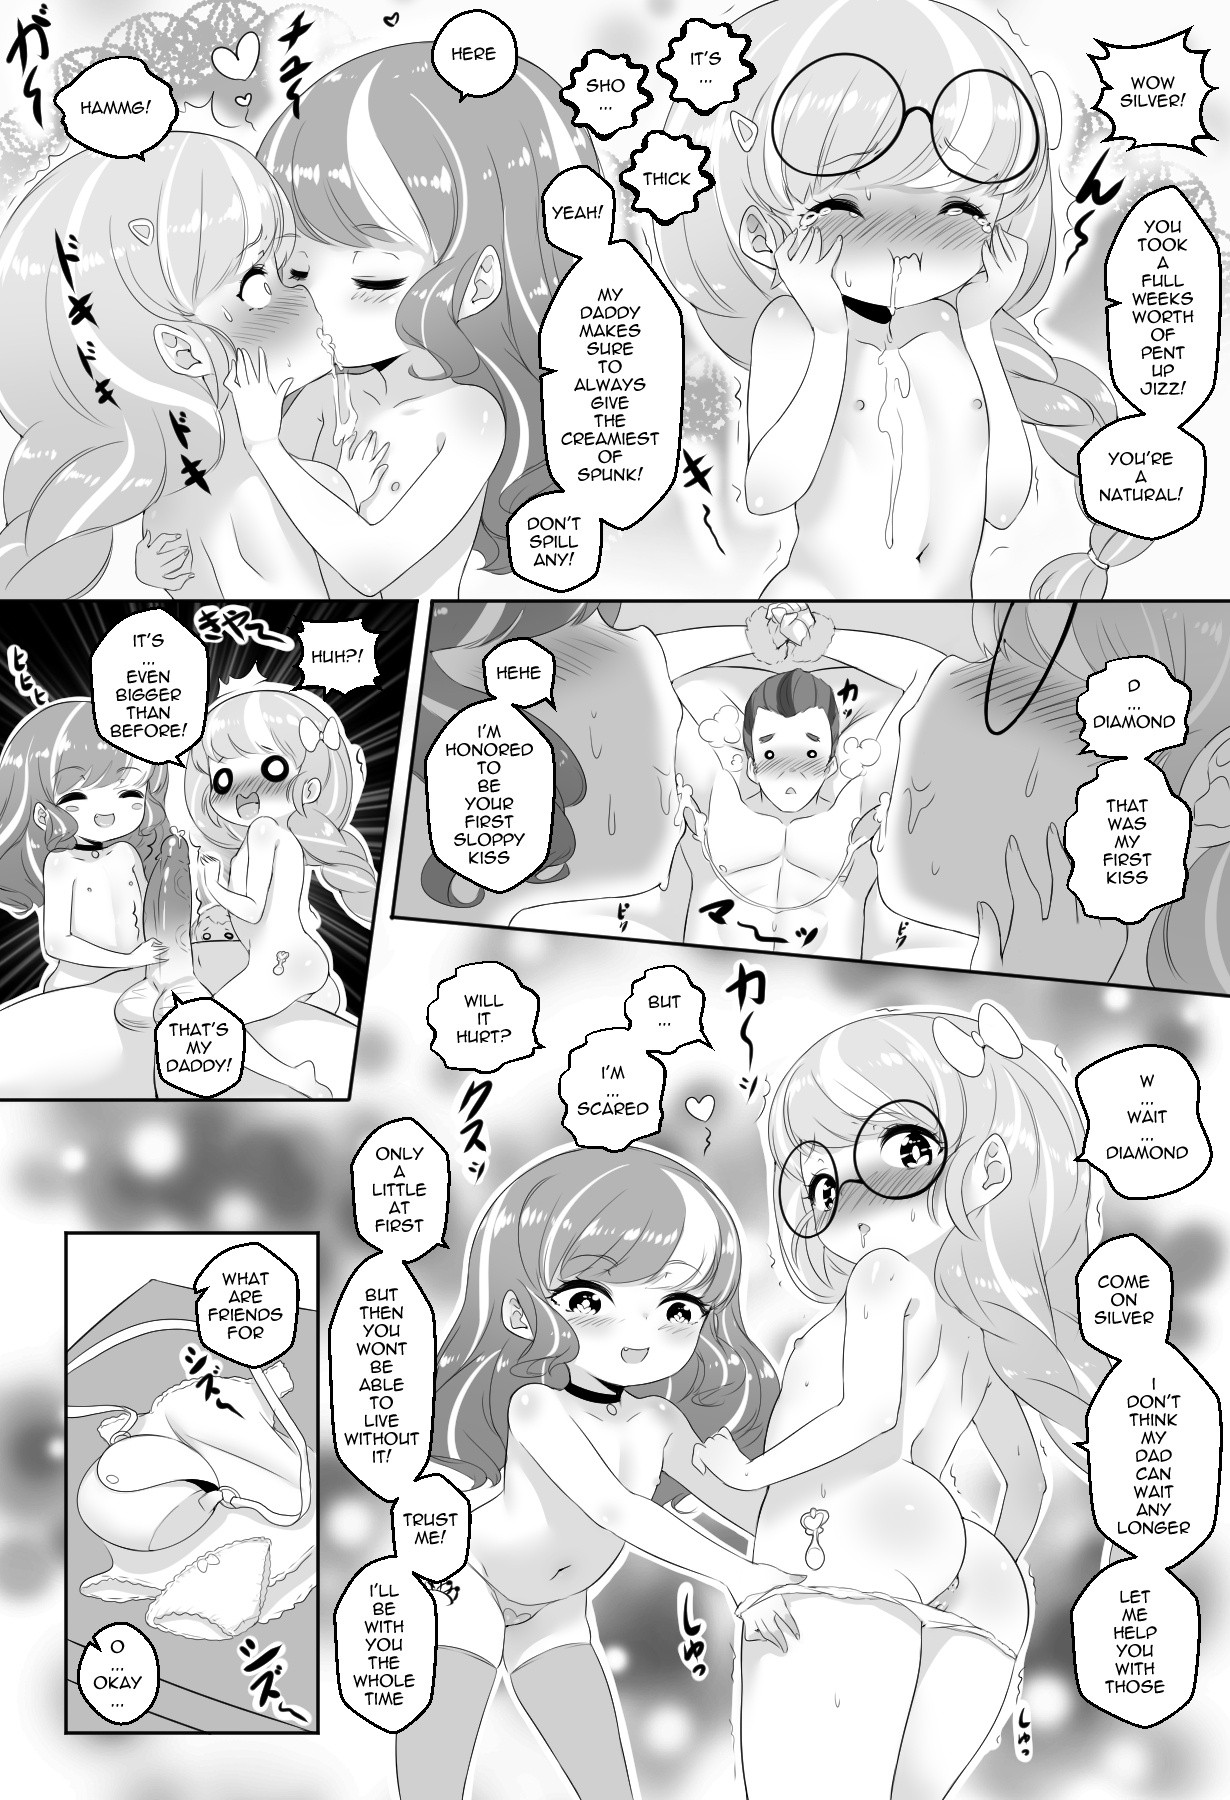 What are friends for hentai manga picture 14